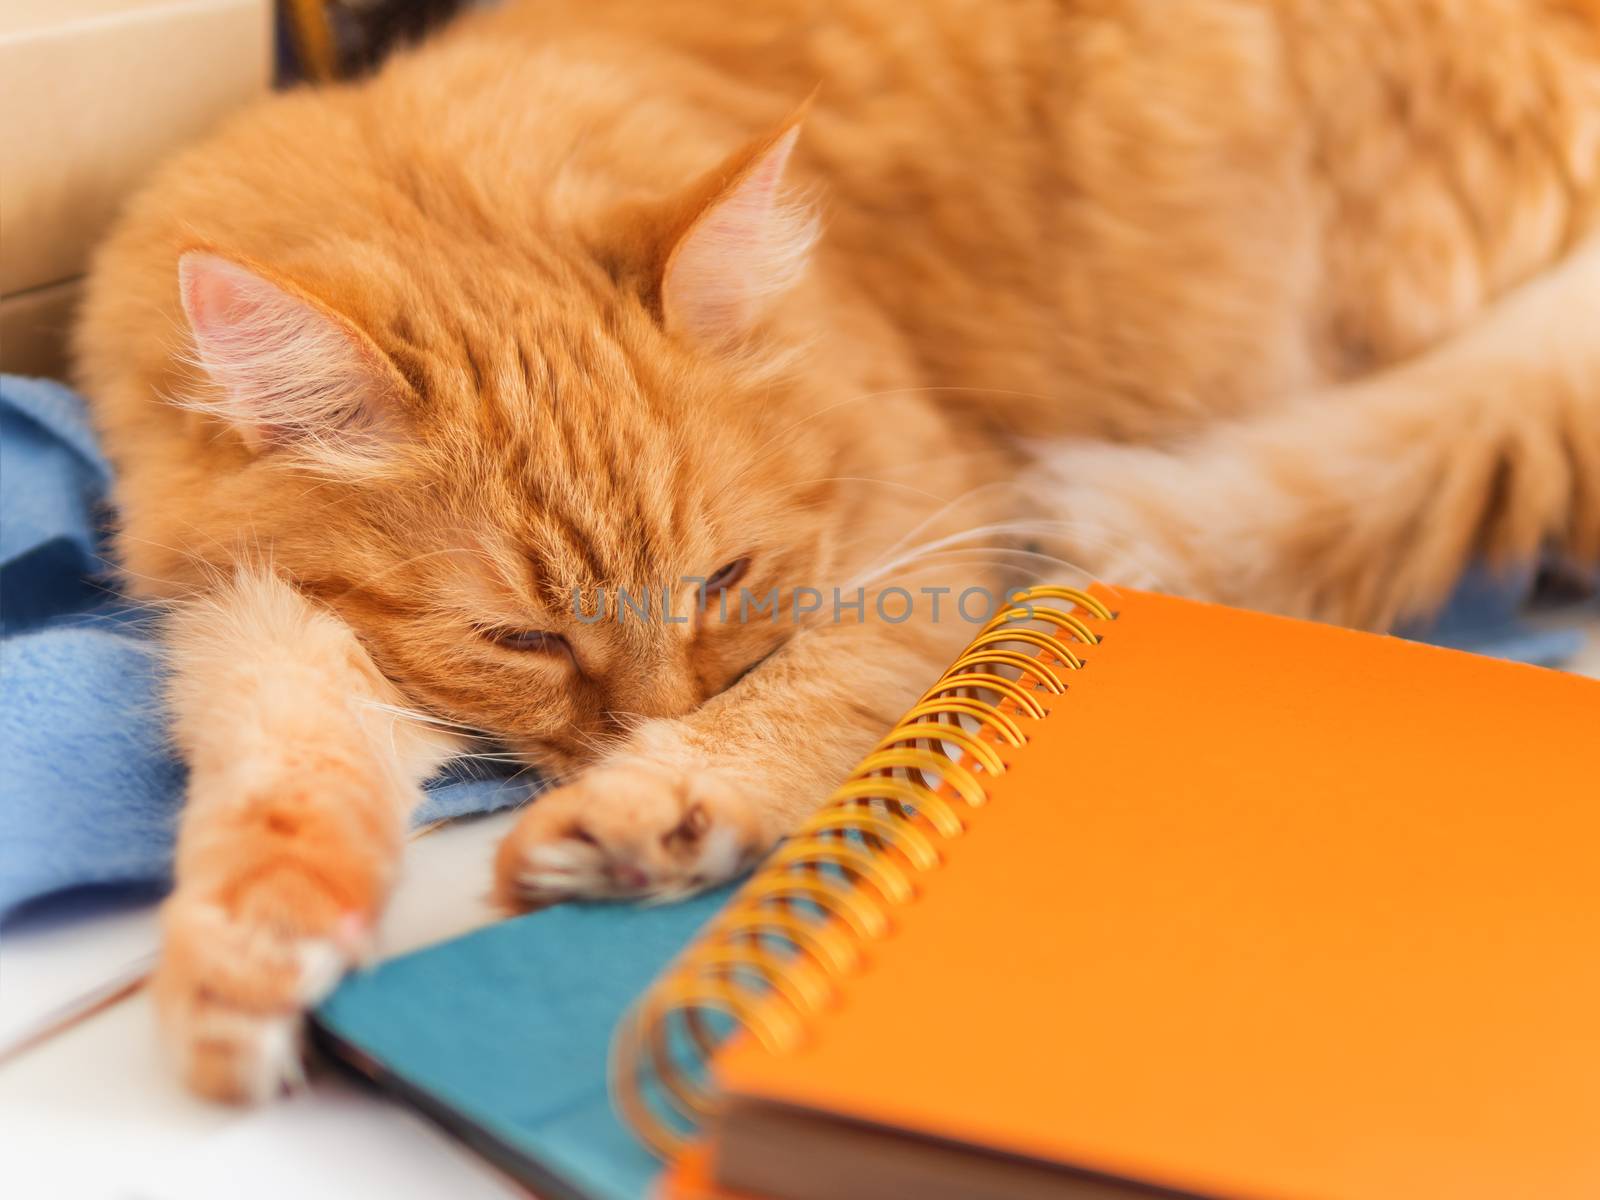 Cute ginger cat is sleeping among office supplies. Fluffy pet dozing on stationery. Cozy home background.